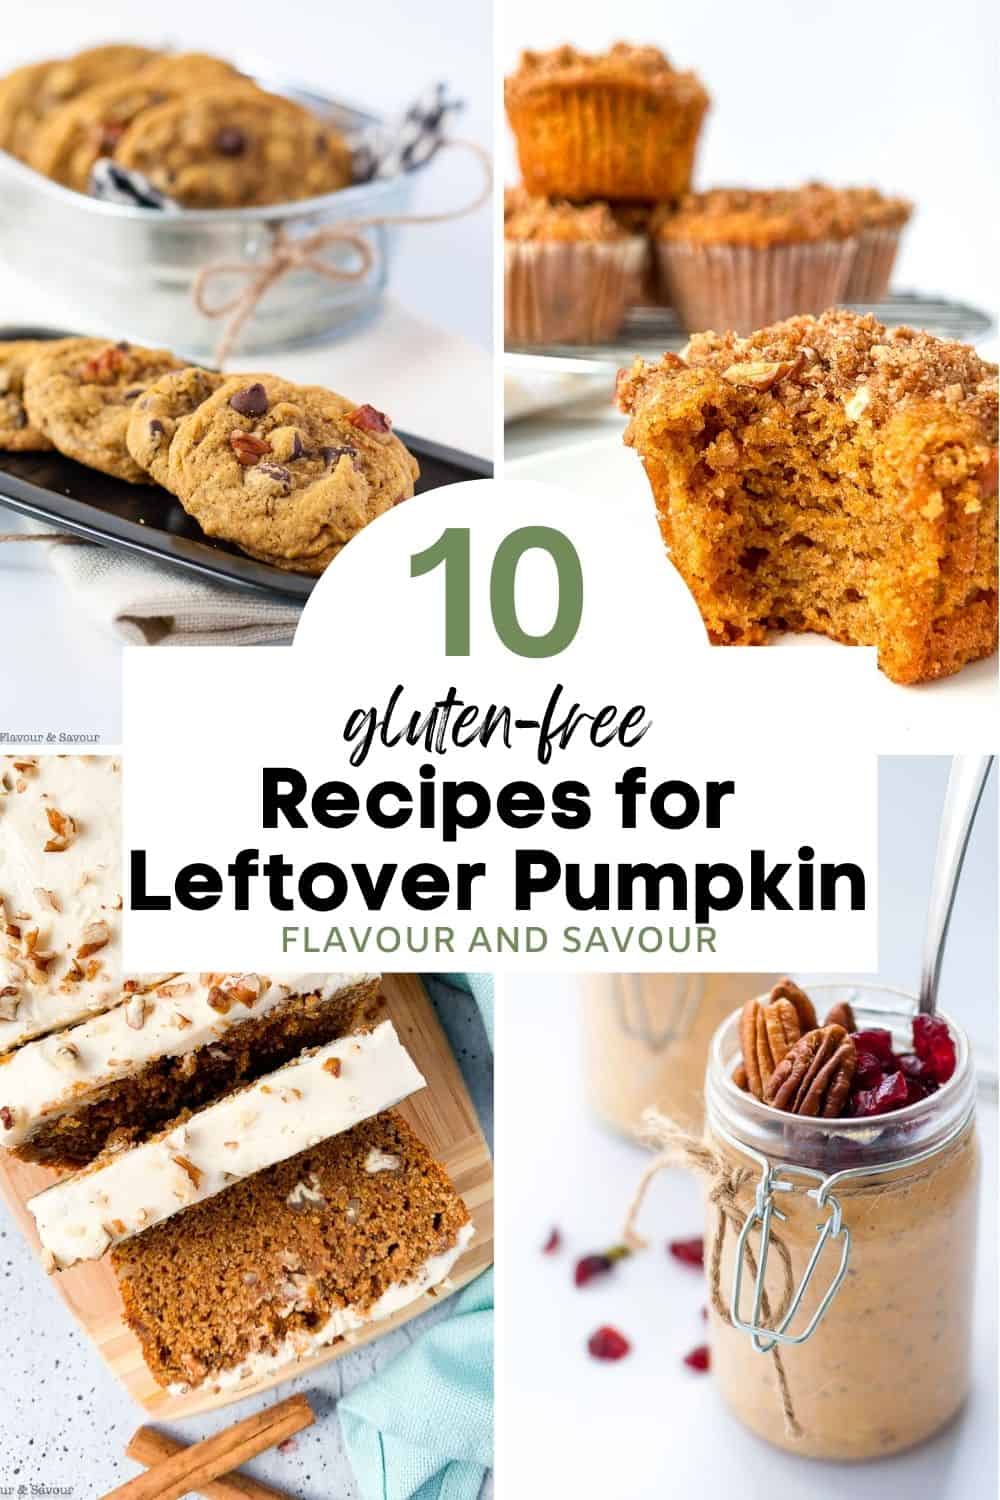 A collage of images with text overlay for 10 gluten-free recipes for leftover pumpkin purée.